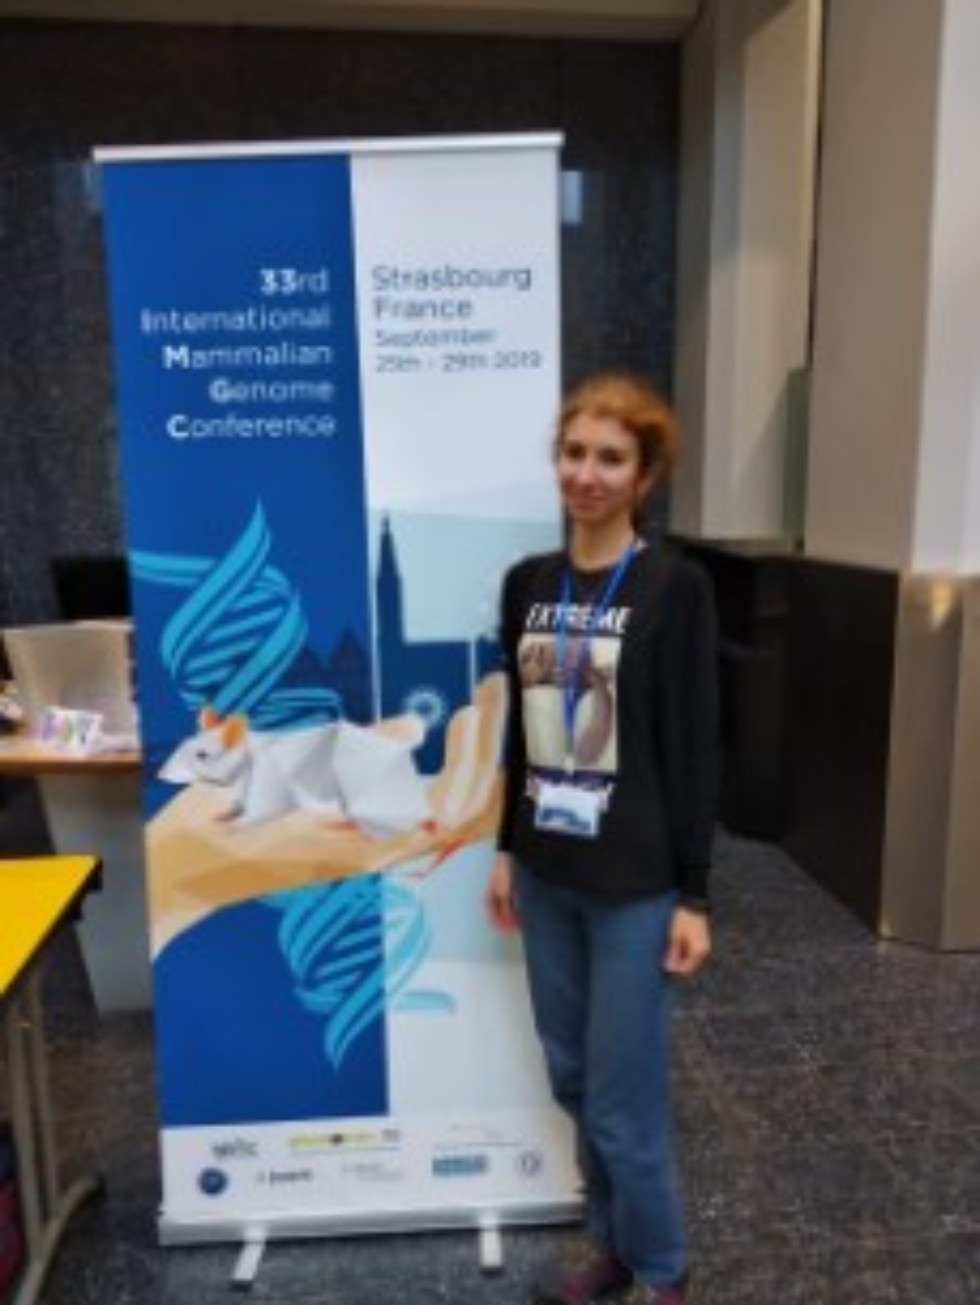 Laboratory employee made a presentation at the international conference on the study of mammalian genomes